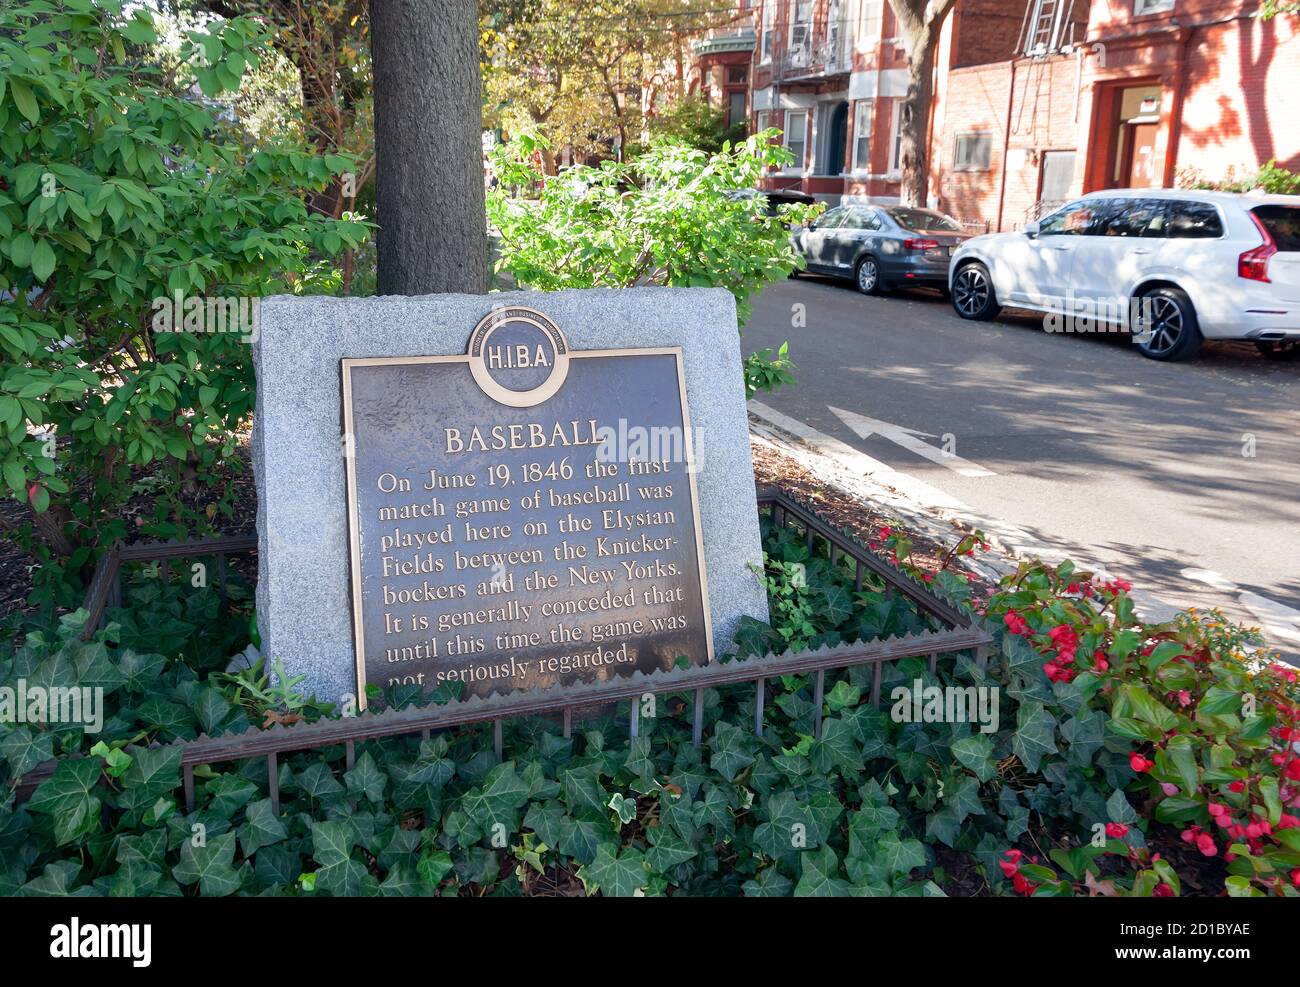 Bronze plaque in Hoboken, NJ marks the place where the first organized baseball game was played between the Knickerbockers & the New Yorks in 1846. Stock Photo